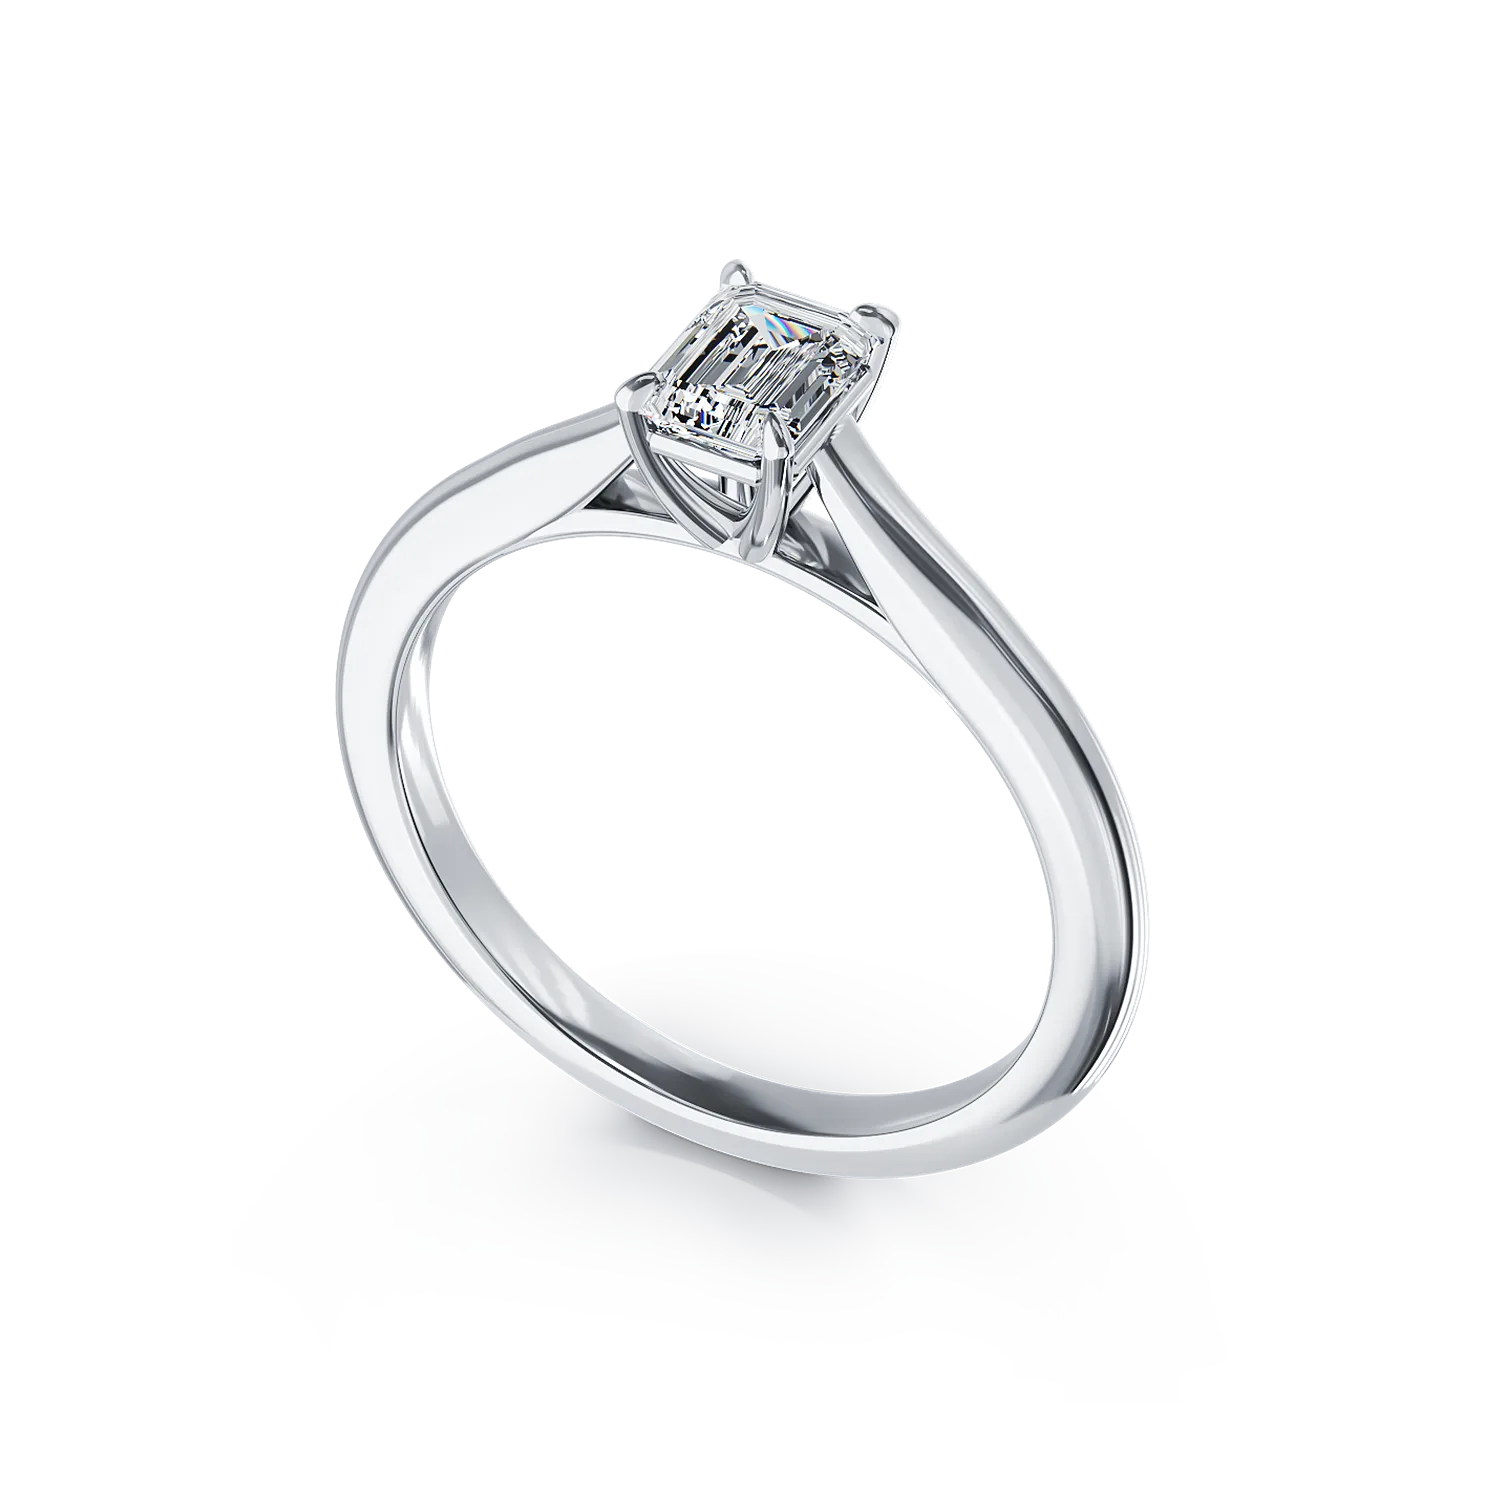 Platinum engagement ring with a 0.5ct solitaire diamond